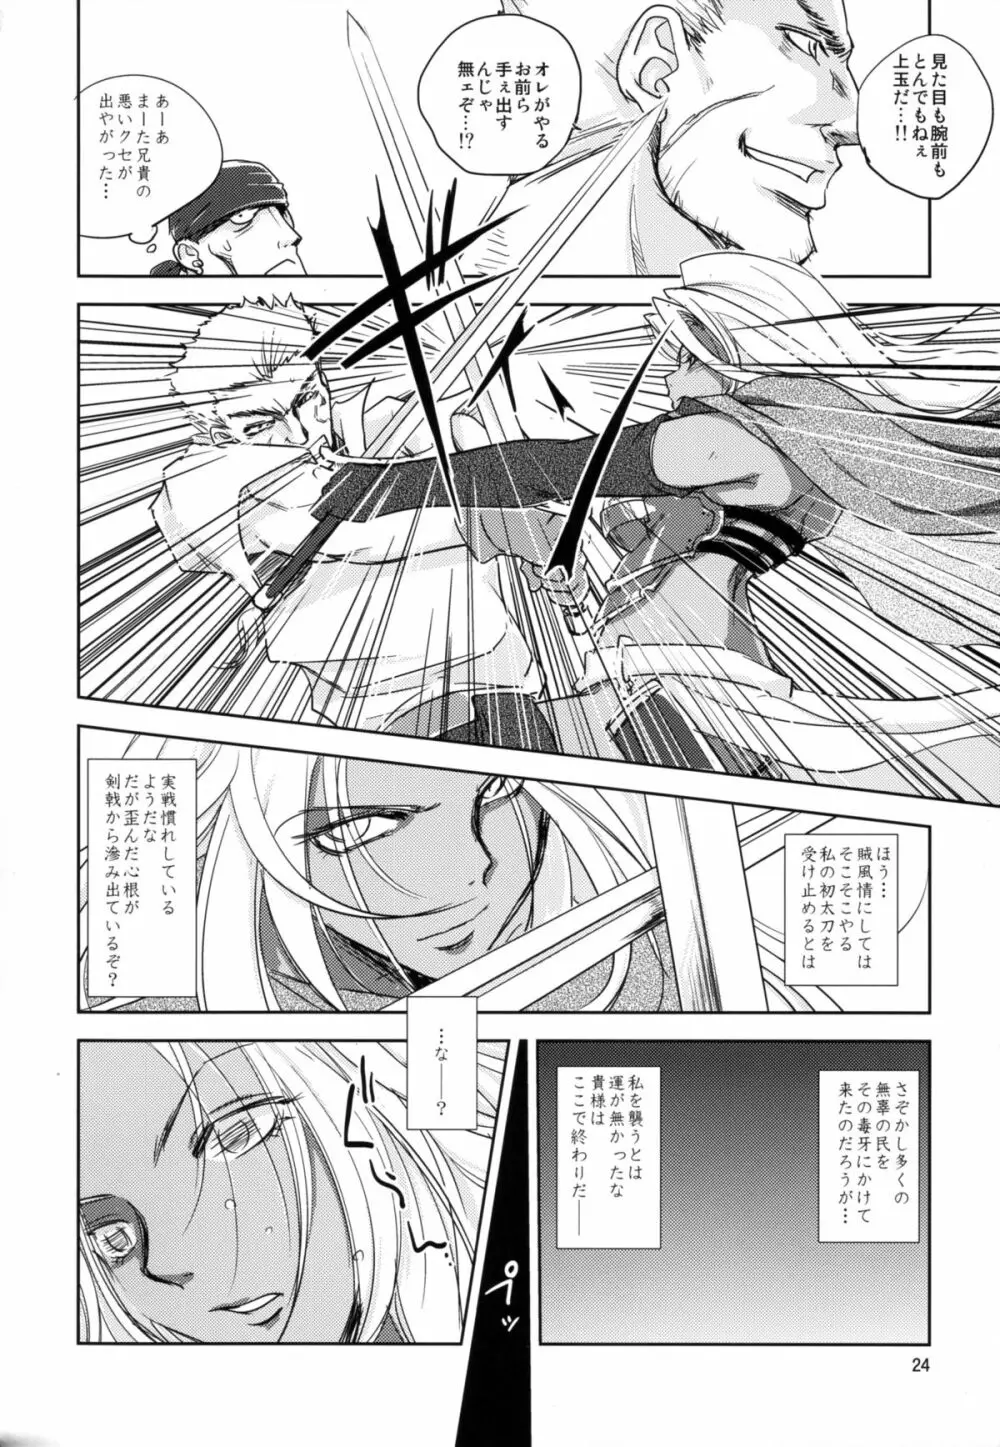 GRASSEN'S WAR ANOTHER STORY Ex #04 ノード侵攻 IV Page.24